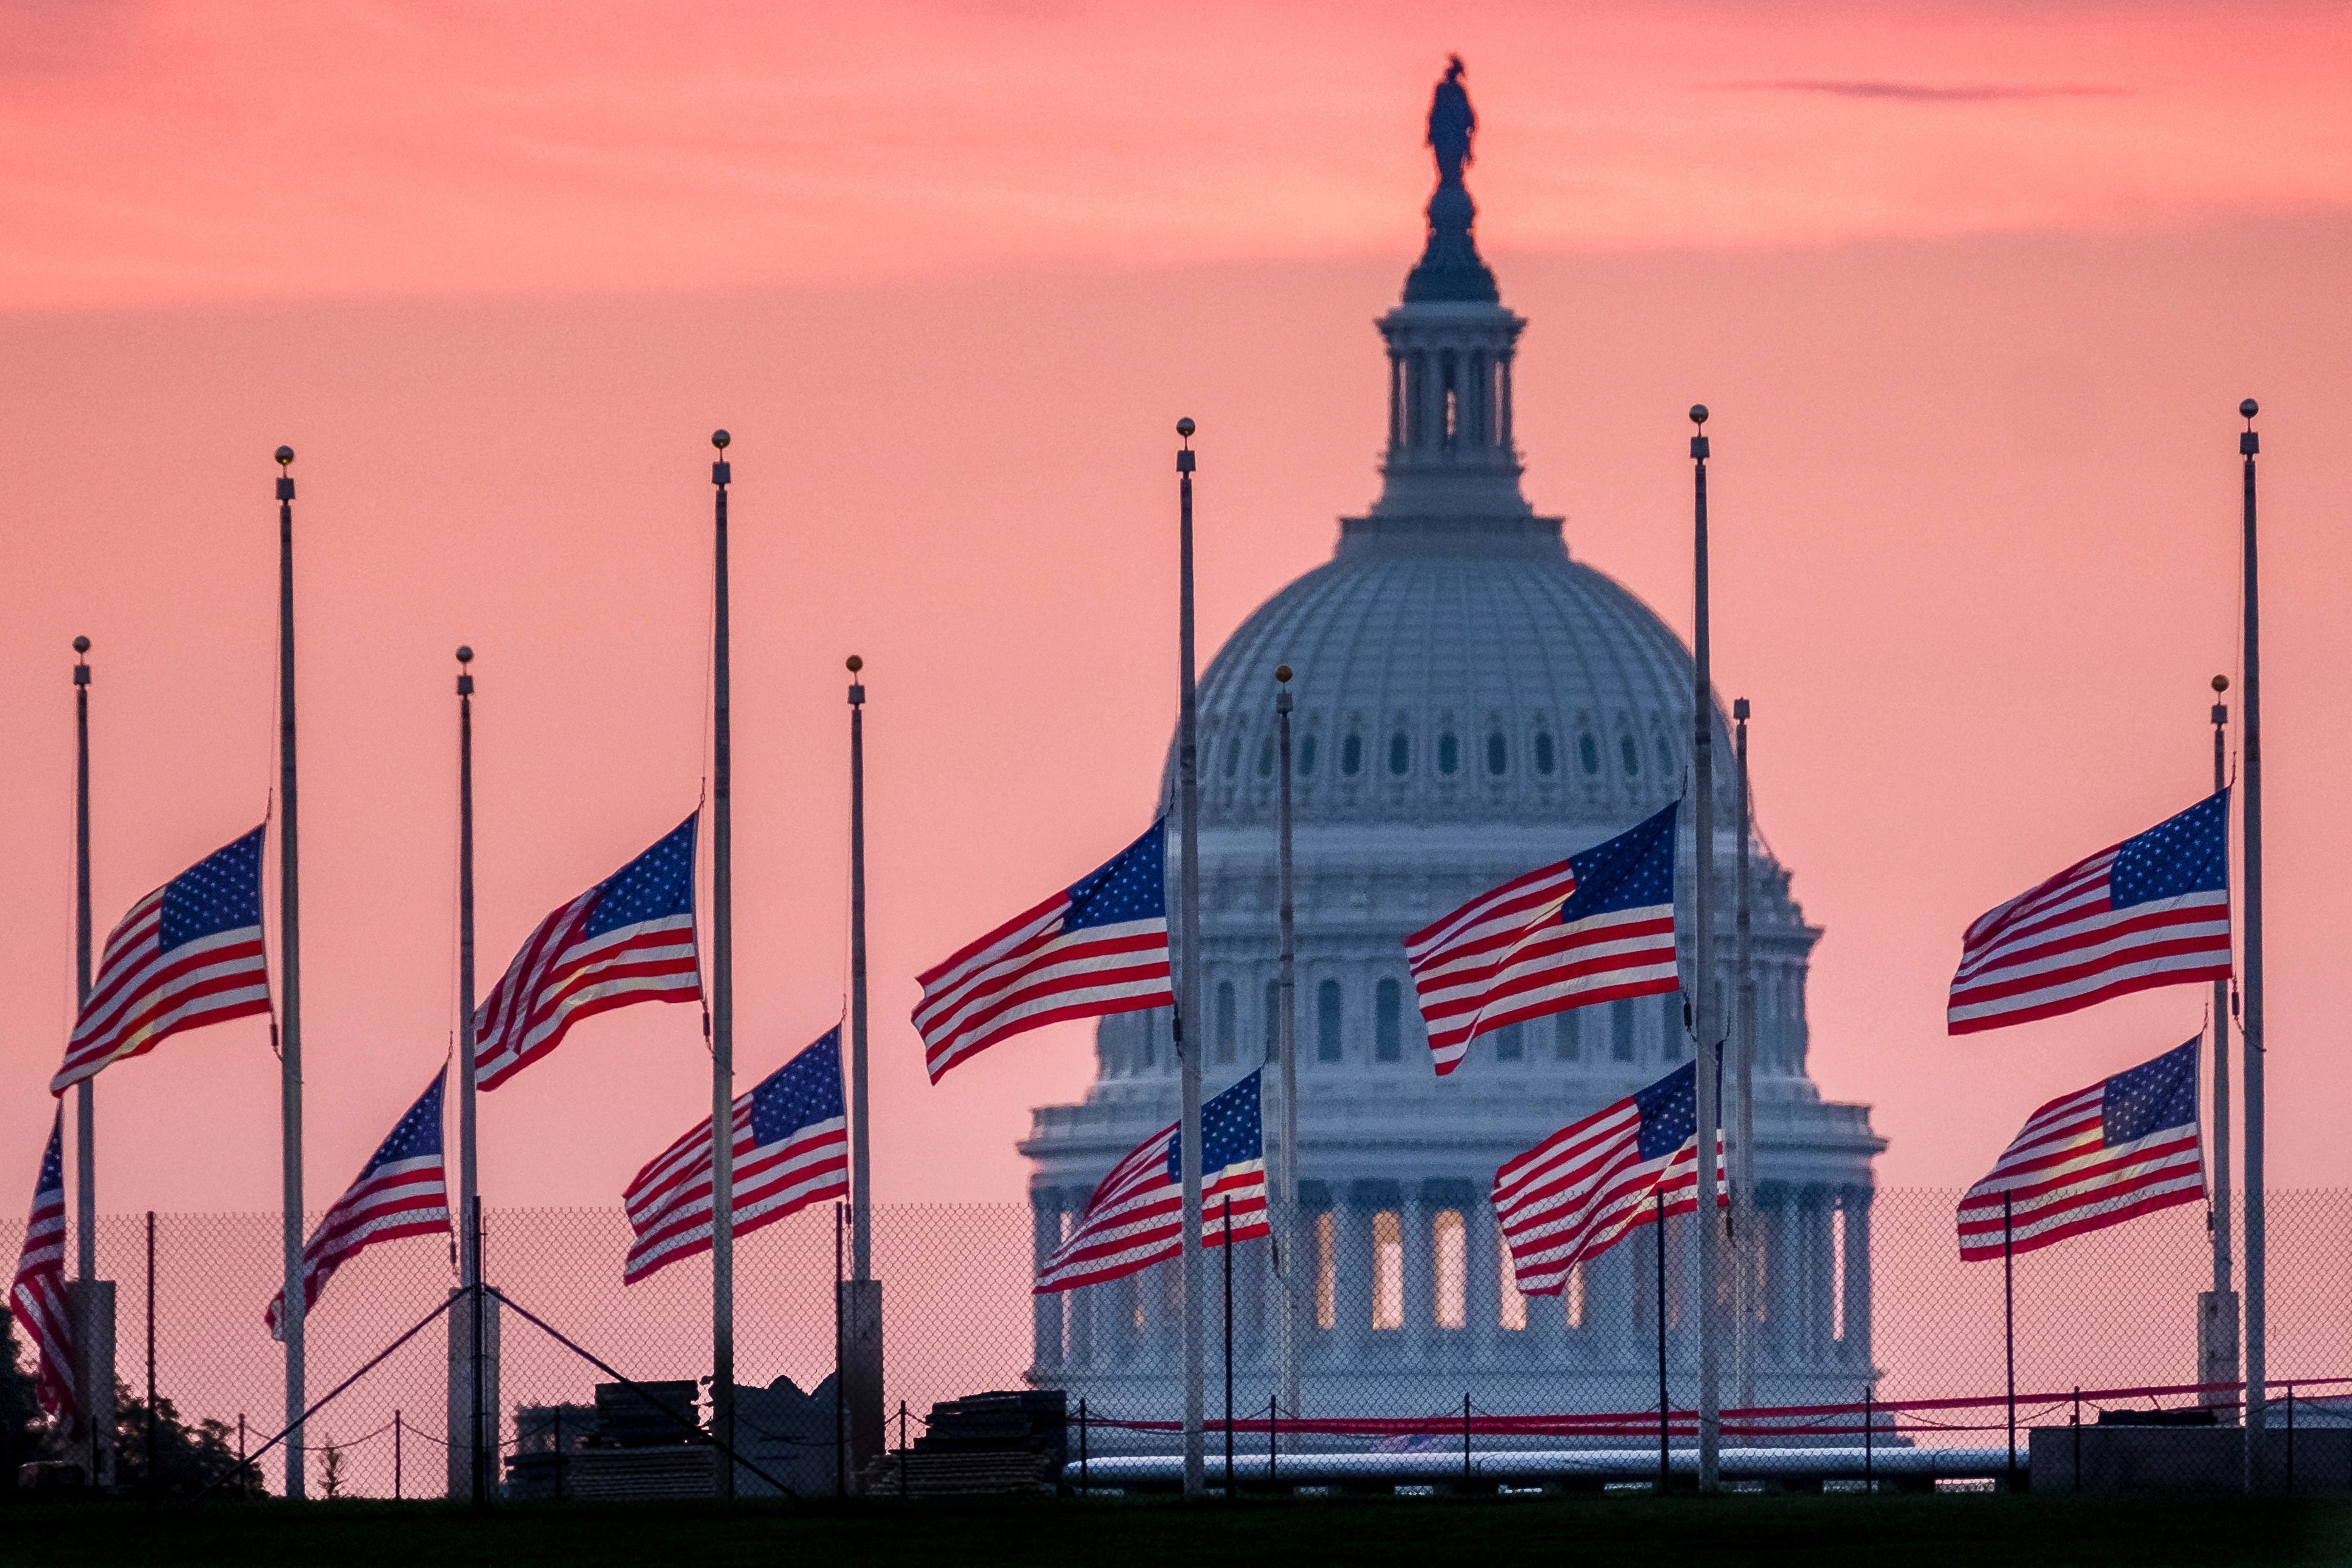 Flags flying at half-staff in honor of Sen. John McCain, R-Ariz., frame the U.S. Capitol at daybreak in Washington, Aug. 26, 2018. McCain, 81, died at his ranch in Arizona after a yearlong battle with brain cancer.